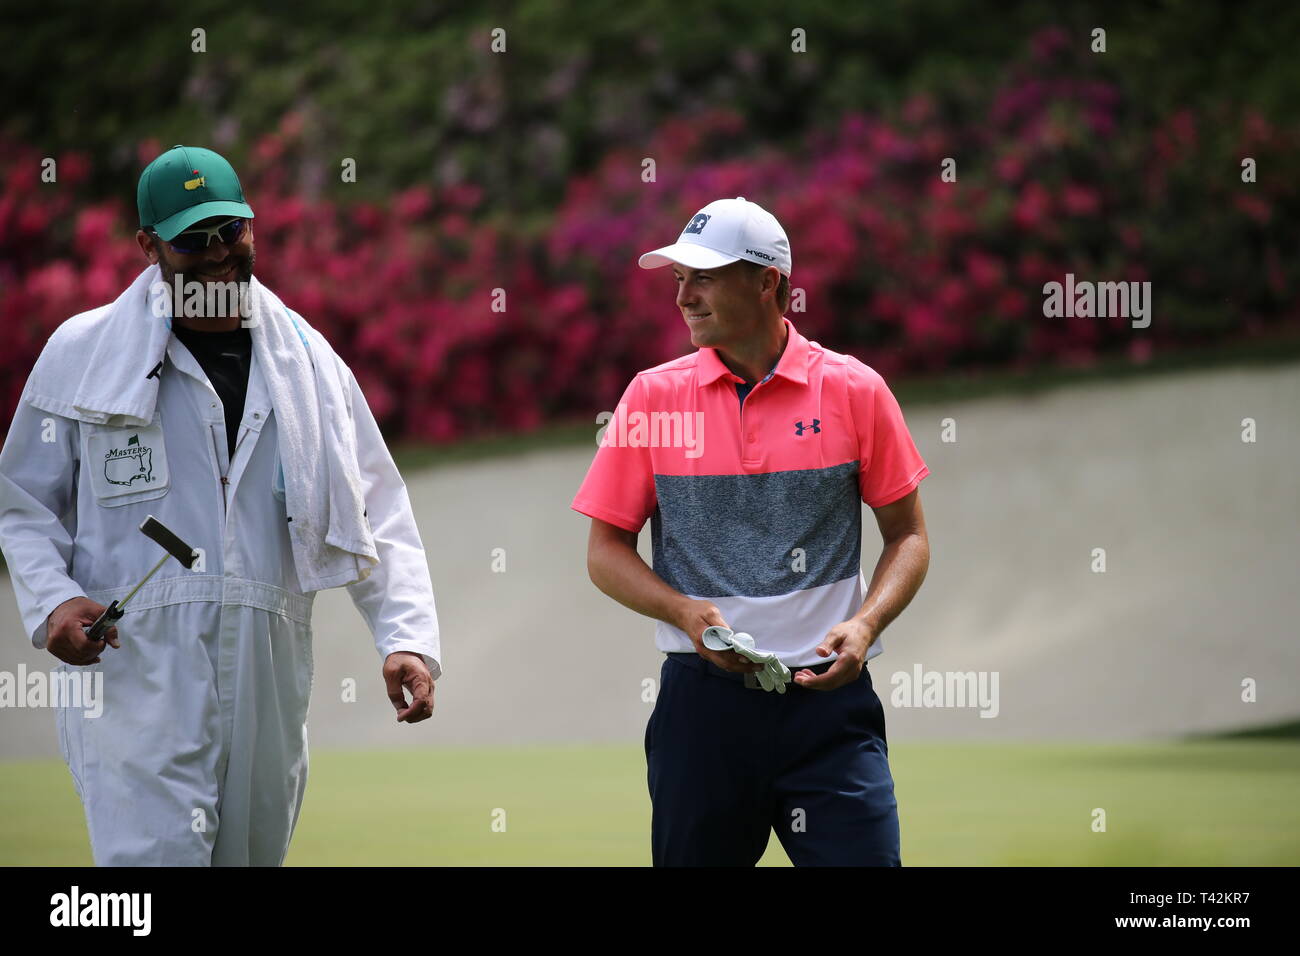 USA's Jordan Spieth on the 18th hole during the second round of the 2019 Masters golf tournament at the Augusta National Golf Club in Augusta, Georgia, United States, on April 12, 2019. (Photo by Koji Aoki/AFLO SPORT) Stock Photo